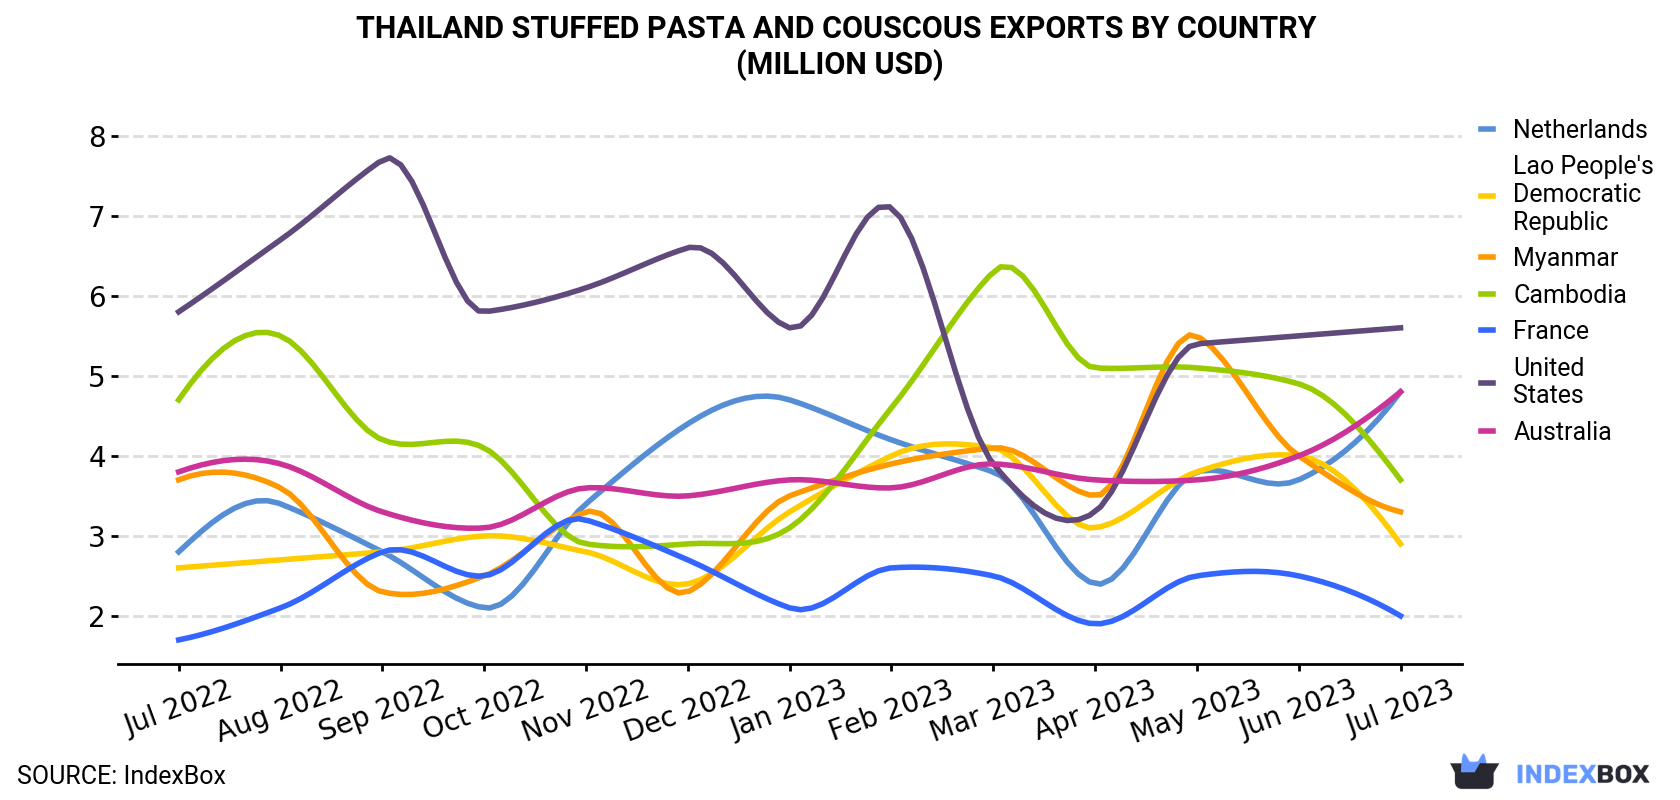 Thailand Stuffed Pasta and Couscous Exports By Country (Million USD)